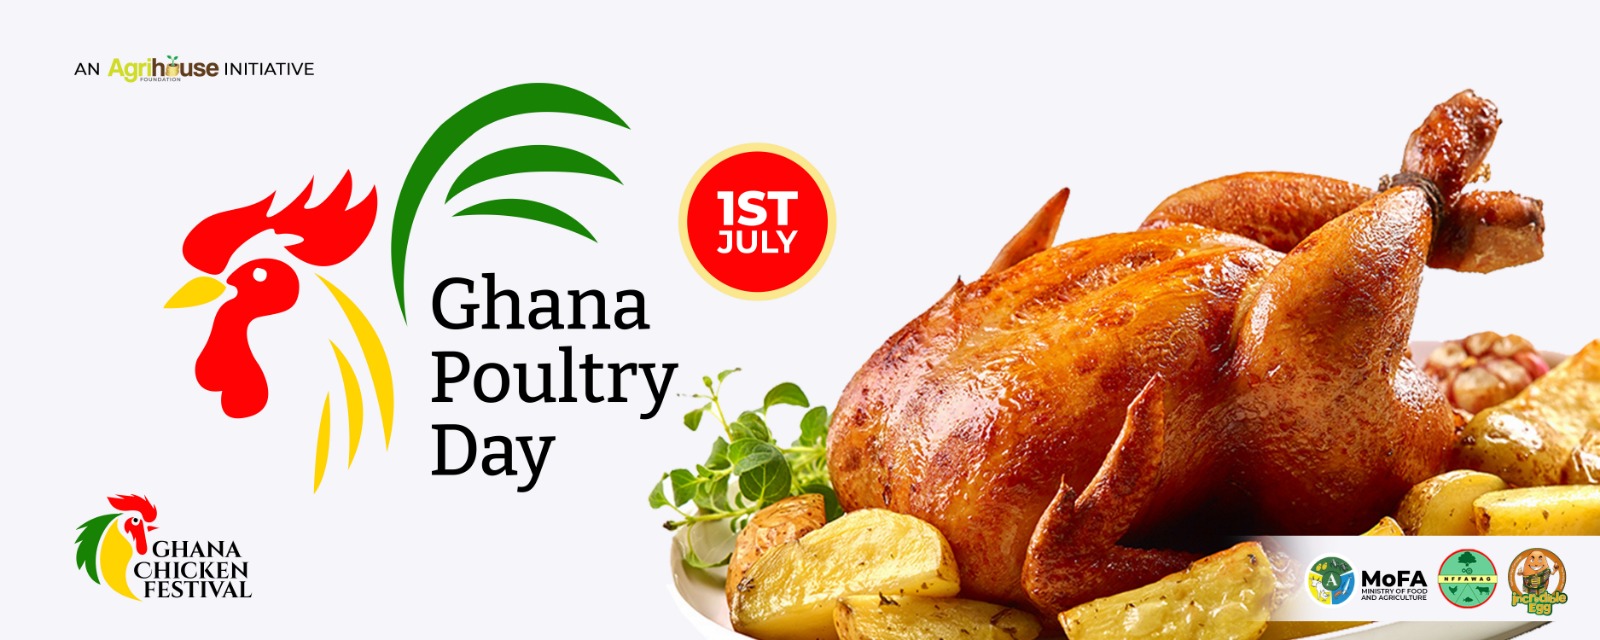 Agrihouse Foundation To Hold Ghana Poultry Day And 3rd Edition Of Chicken Festival On July 1